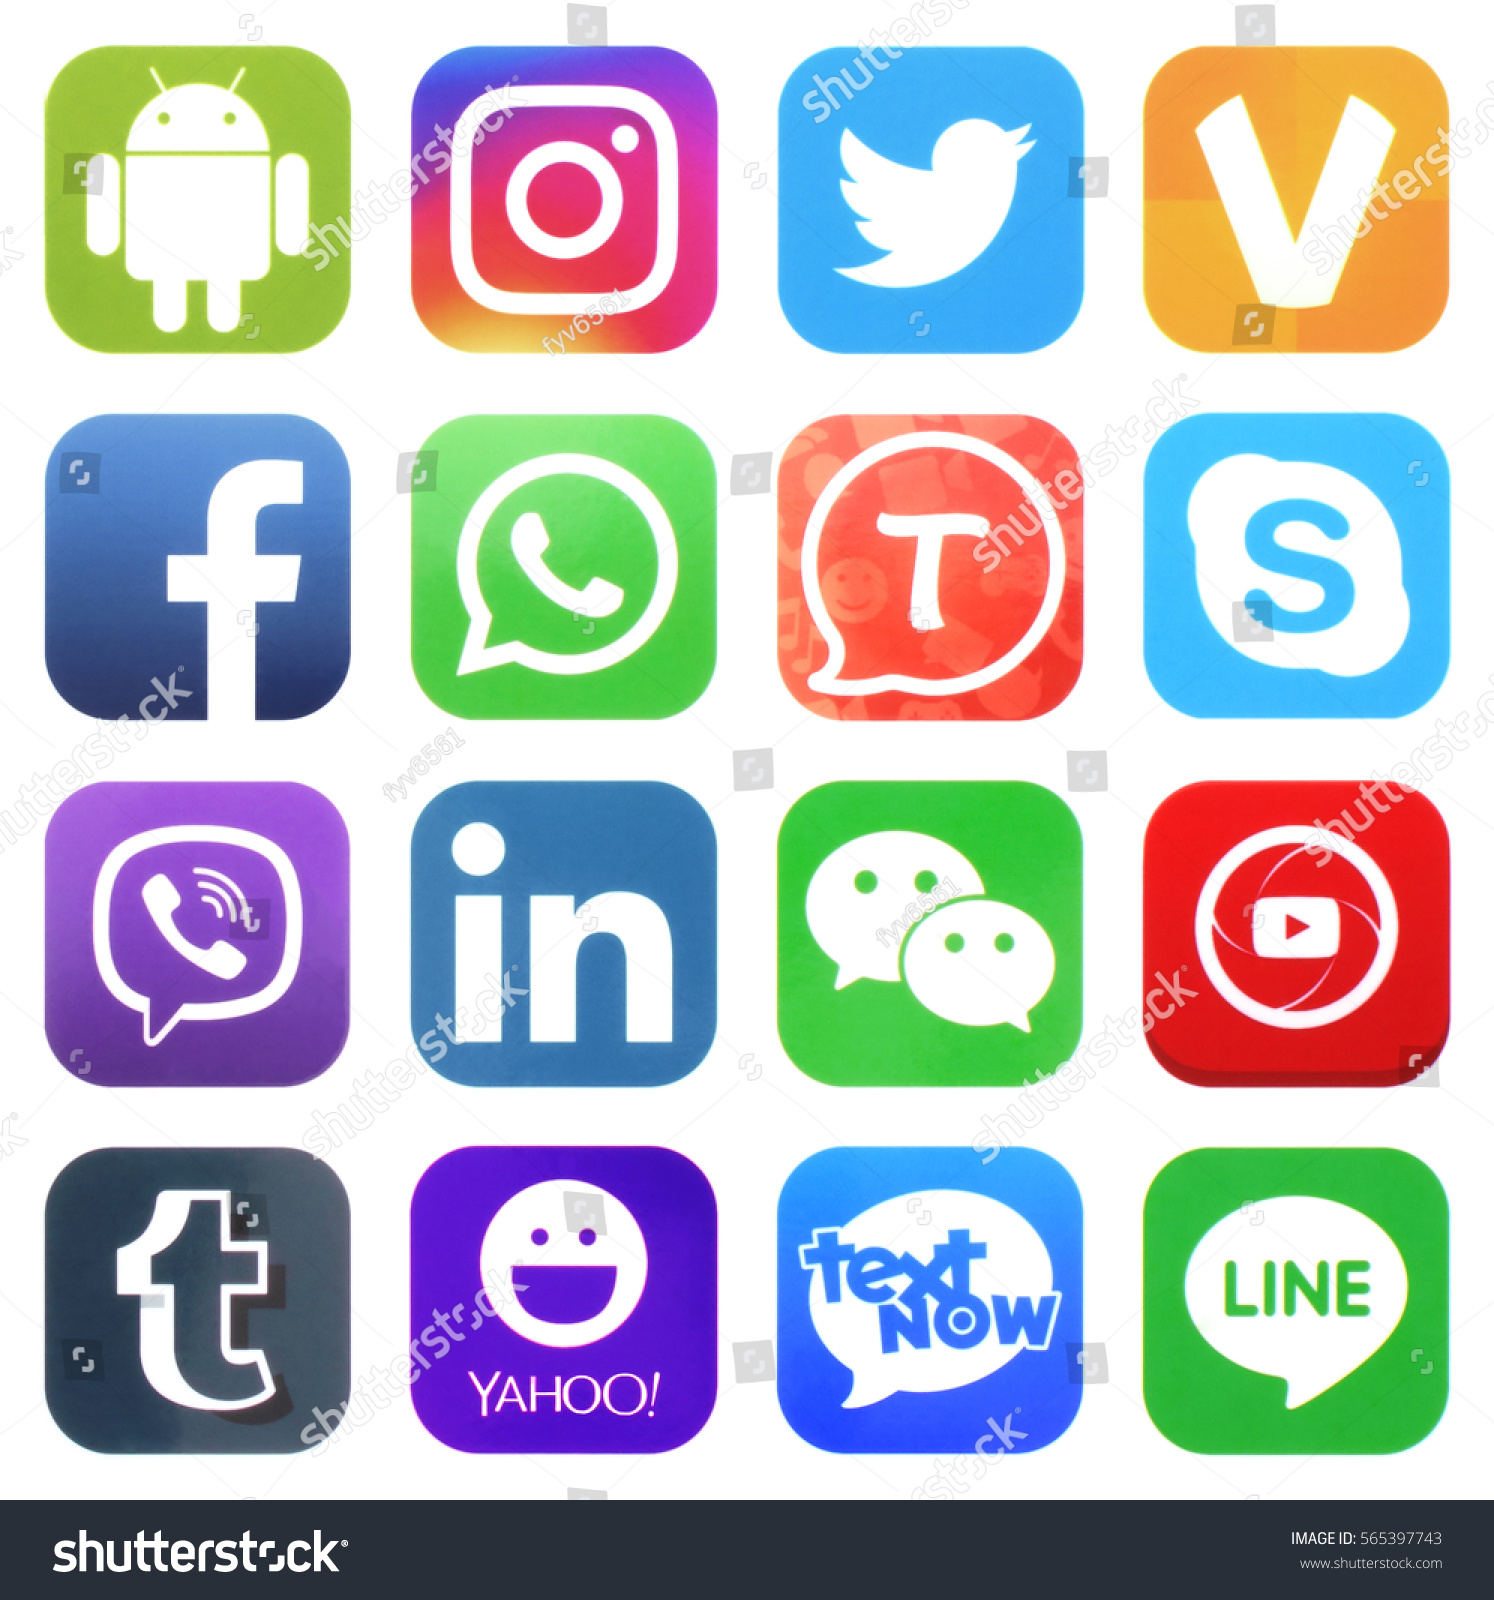 KIEV, UKRAINE - JANUARY 27, 2017: Collection of popular social media logos printed on paper: Facebook, Twitter, LinkedIn, Instagram, Tango, WhatsApp, Youtube, Line and other #565397743